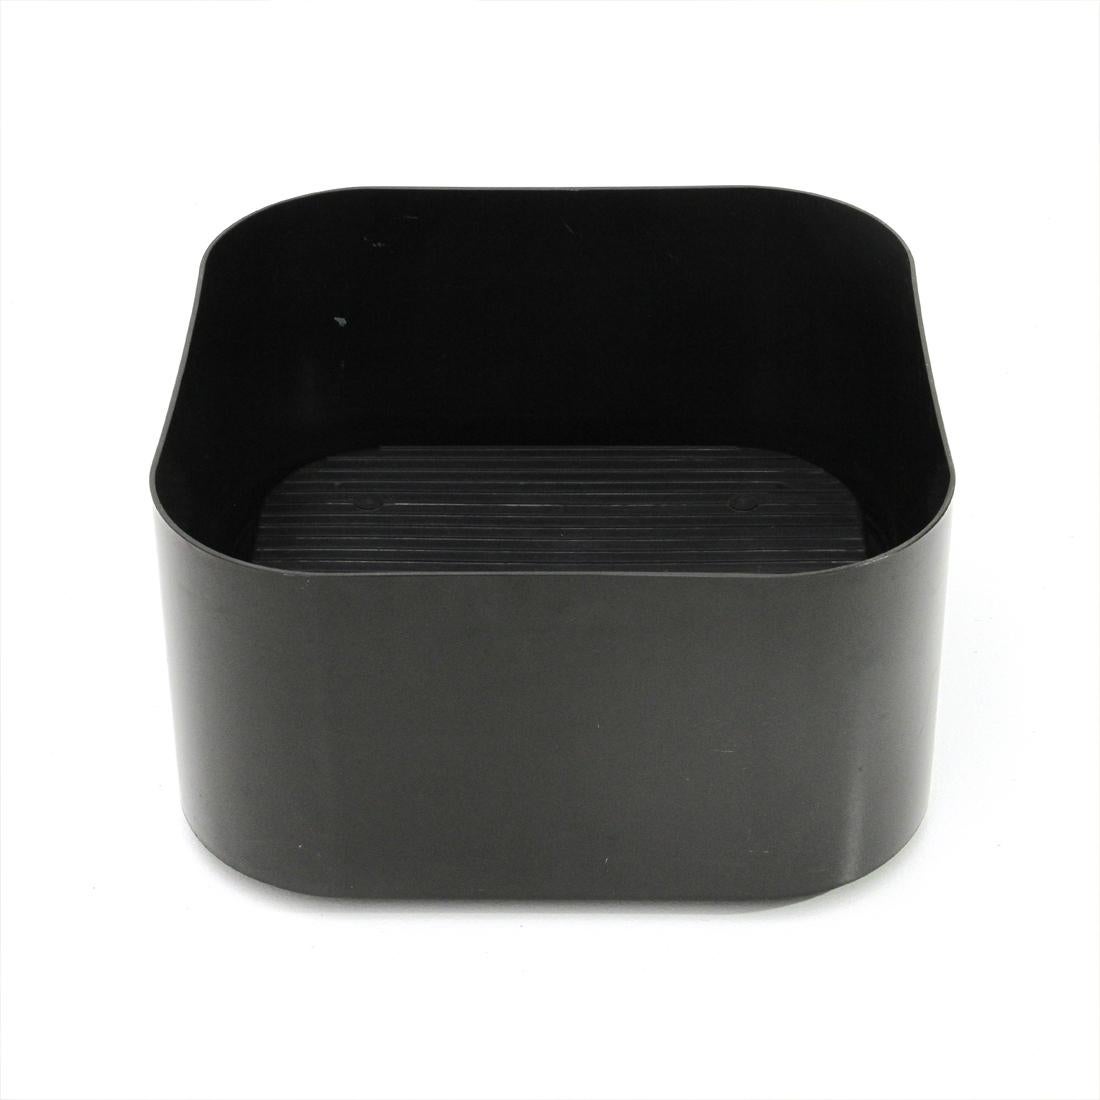 Seventies vase holder produced by Bilumen and designed by Isao Hosoe.
Square shape frame in black ABS with wheels.
Designed to contain four vases.
Good general conditions, some signs due to normal use over time.

Dimensions: Width 60 cm, depth